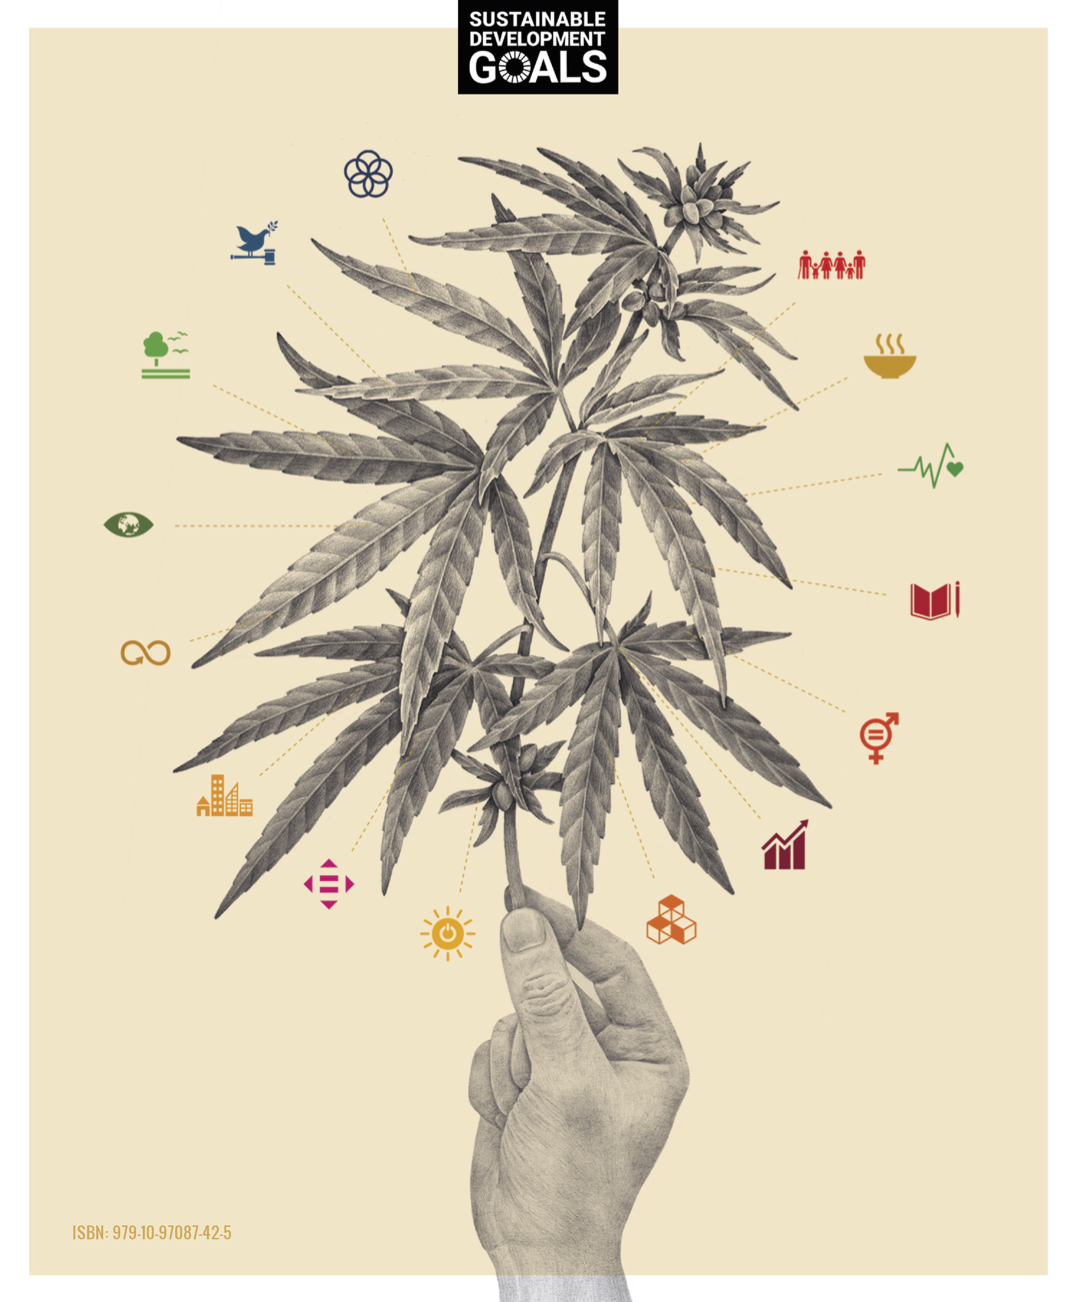 Linking Cannabis and hemp policies to sustainable development and human rights